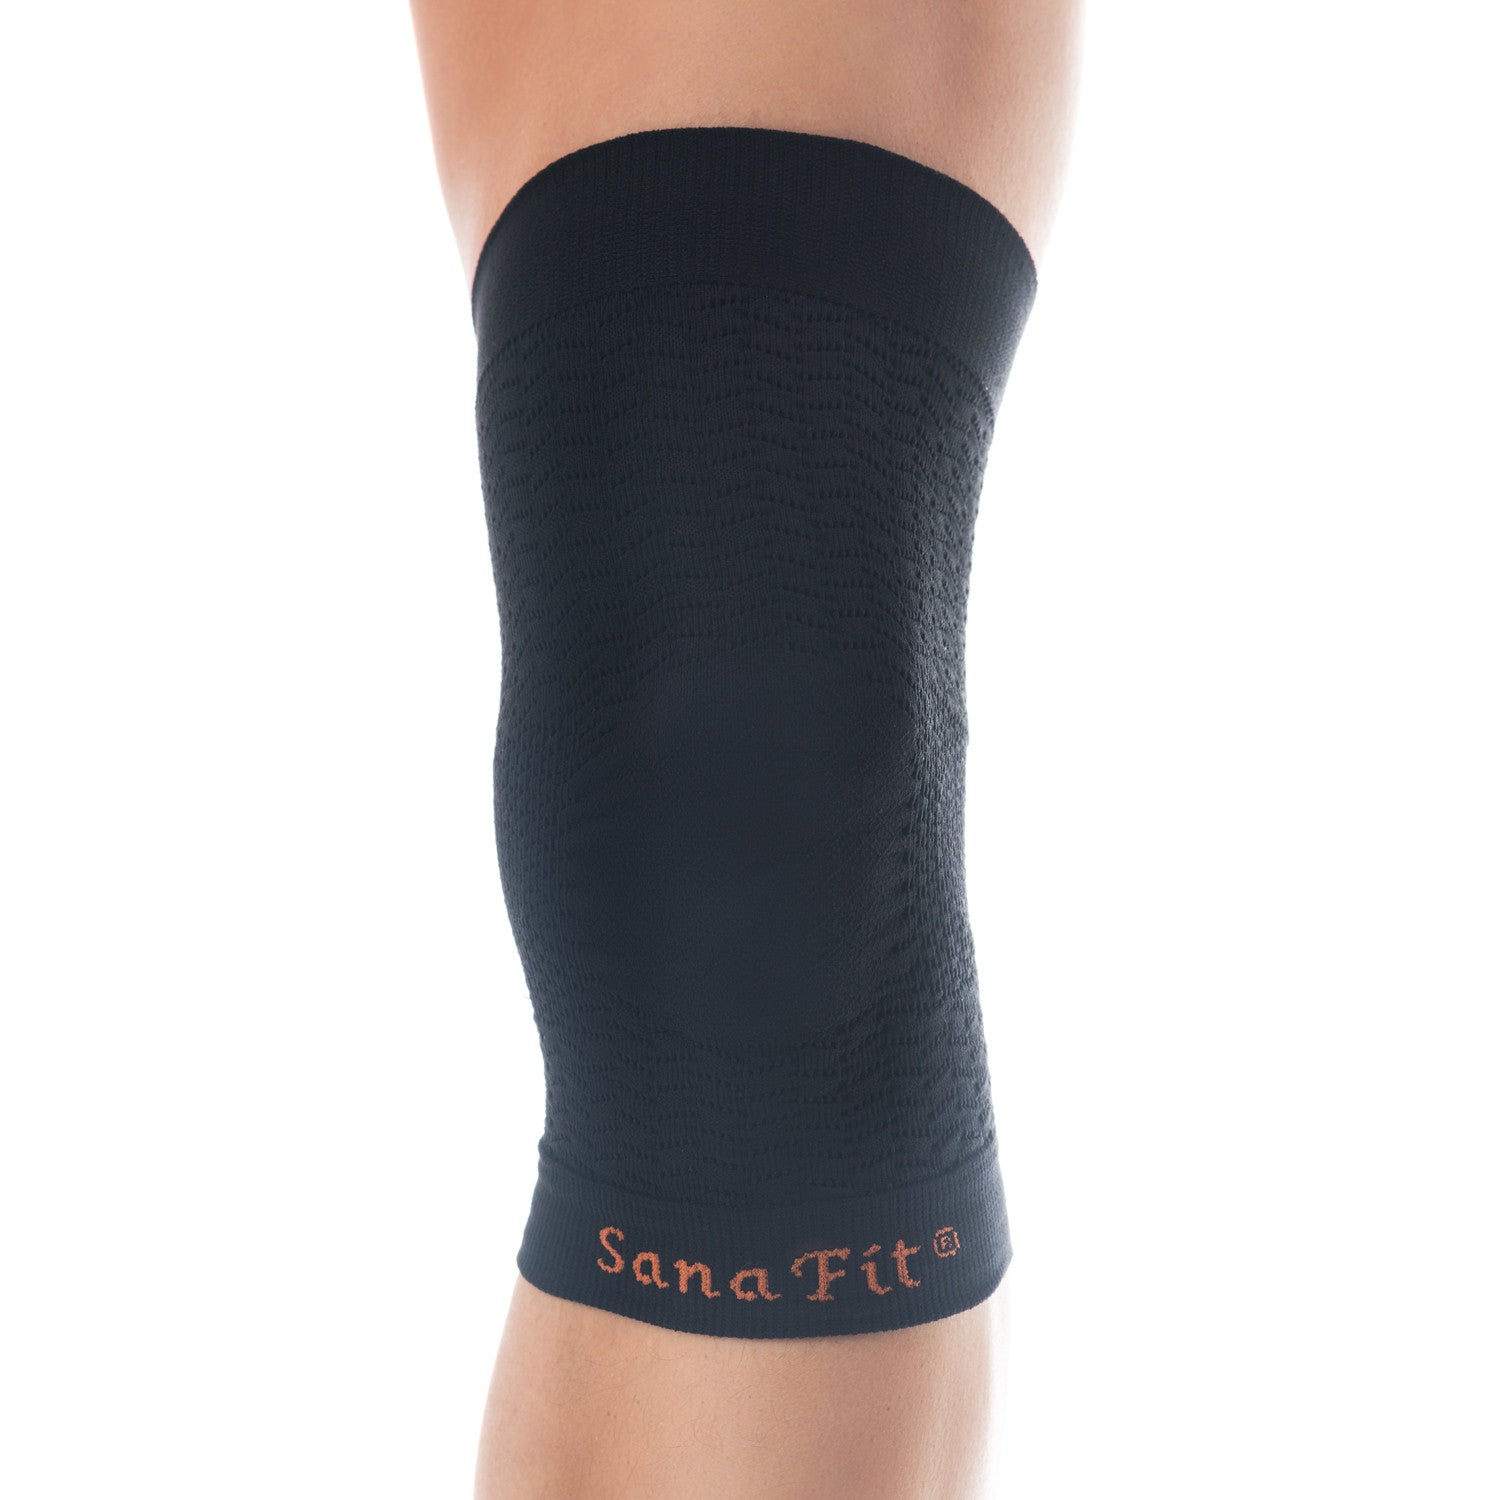 Infrared Knee Support, Knee Sleeve